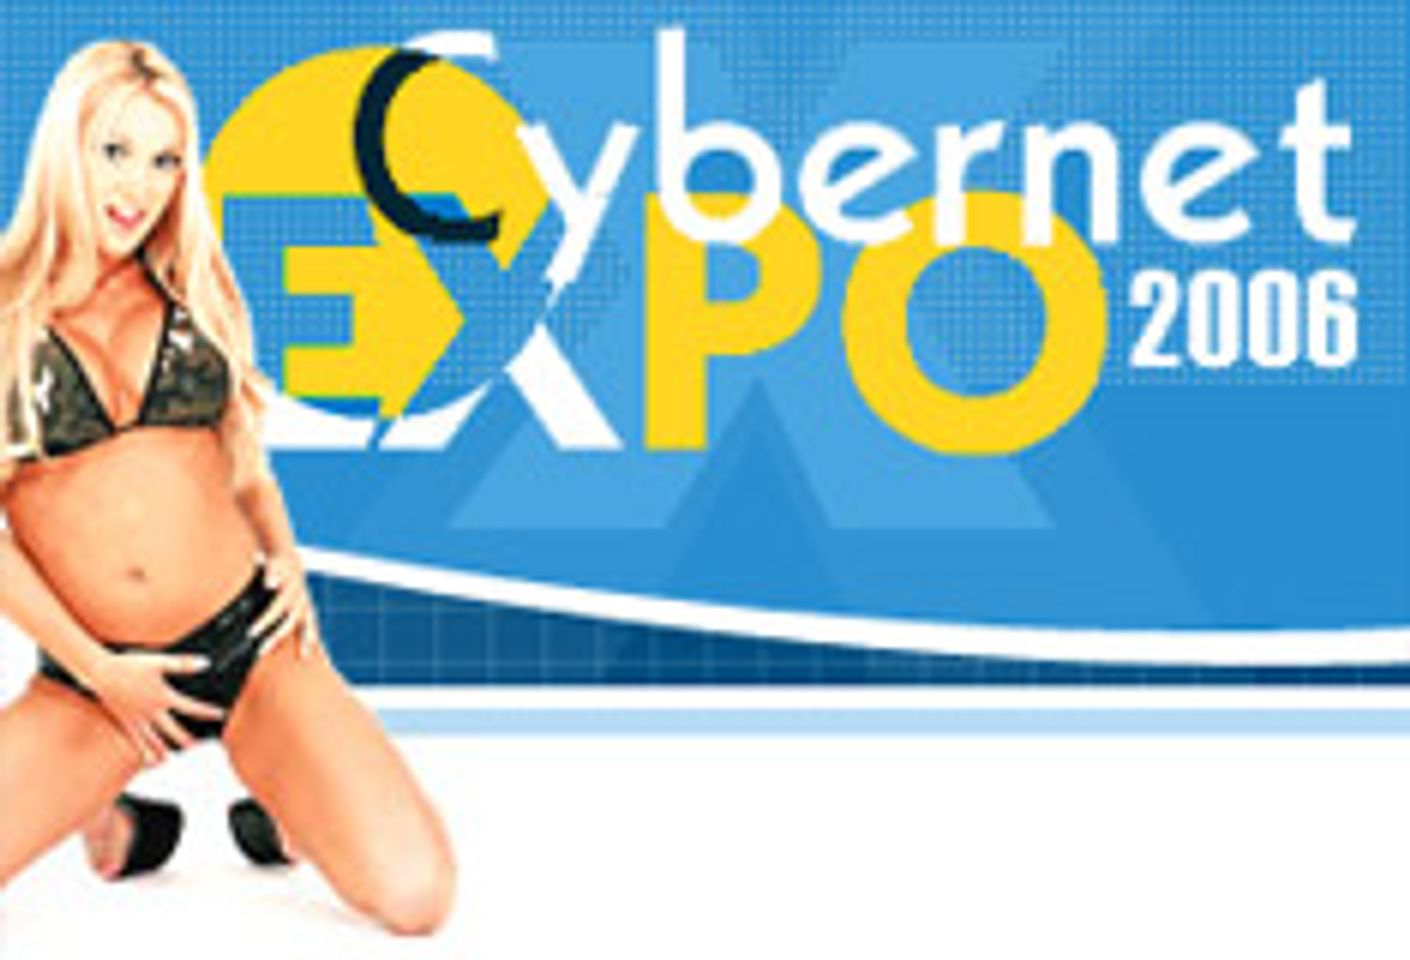 Mark Your Calendars for Cybernet Expo 2006